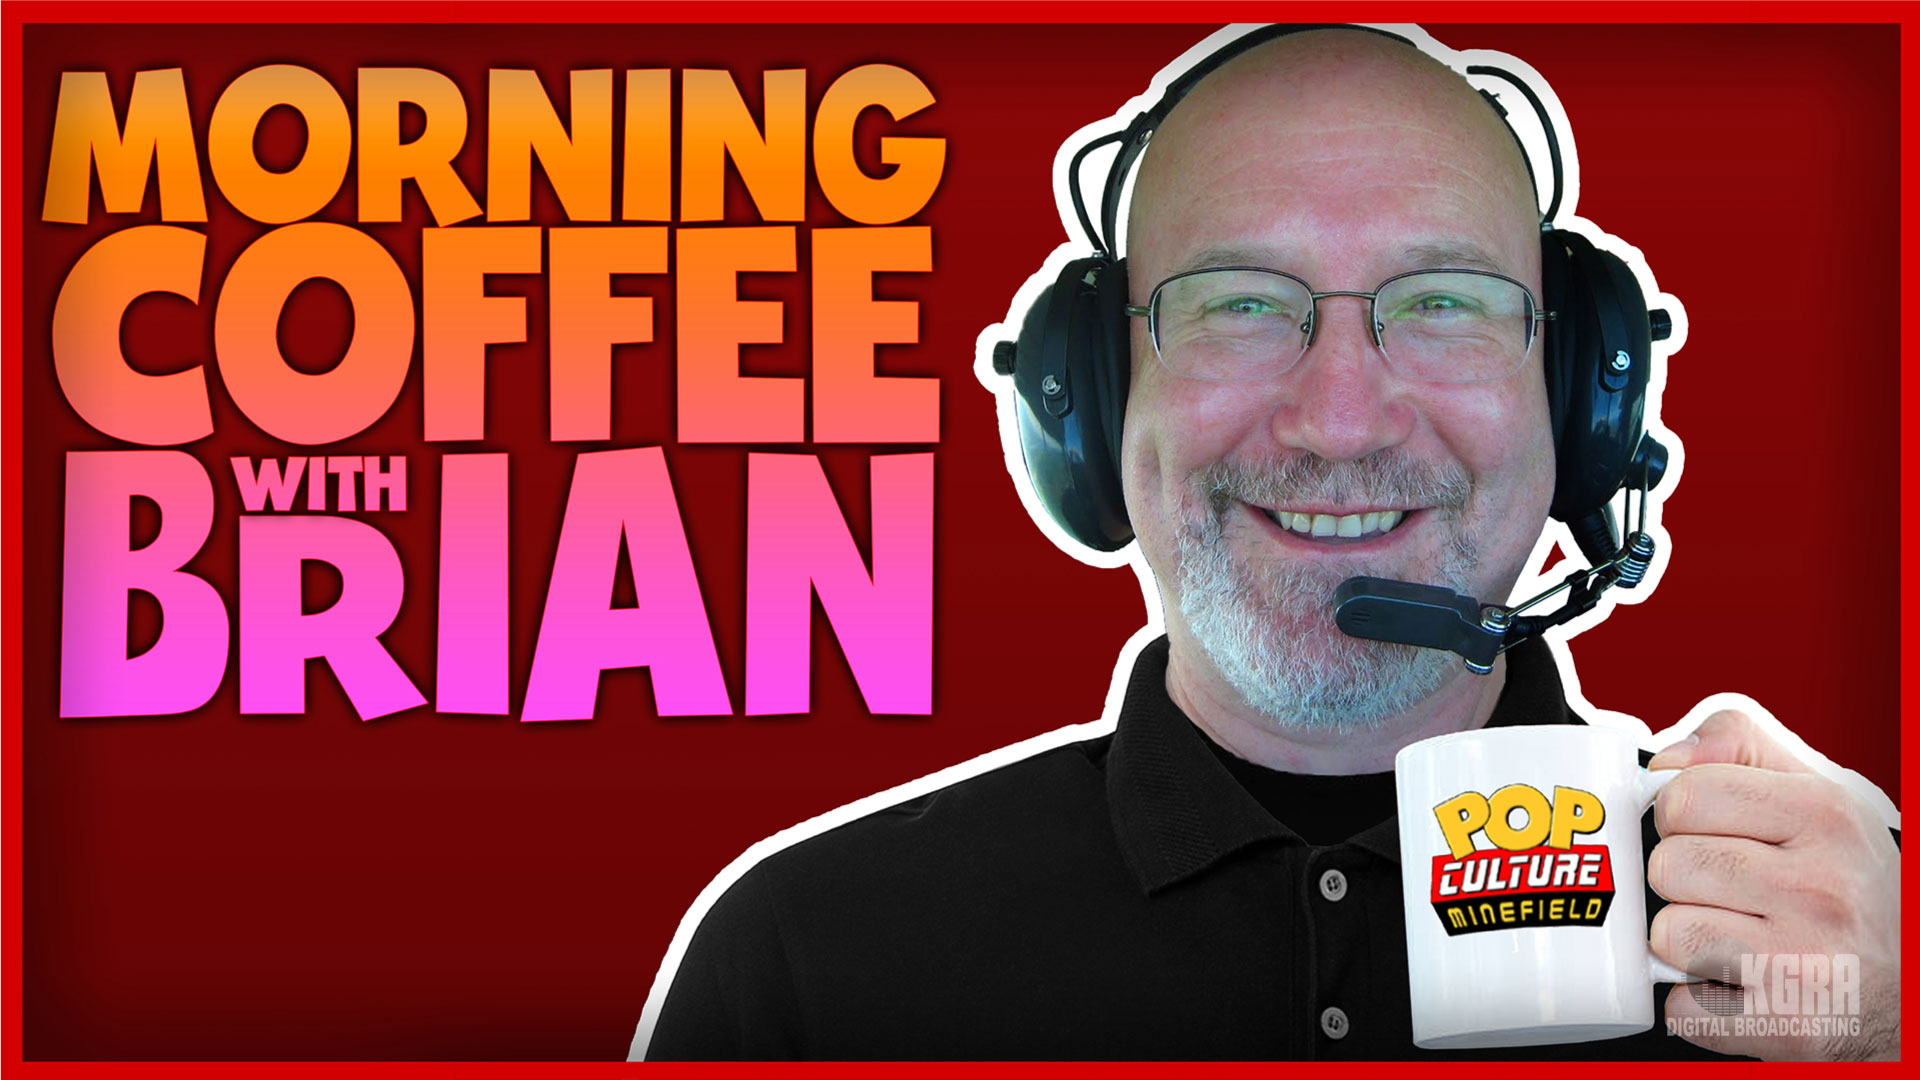 Morning Coffee with Brian - KGRA Digital Broadcasting